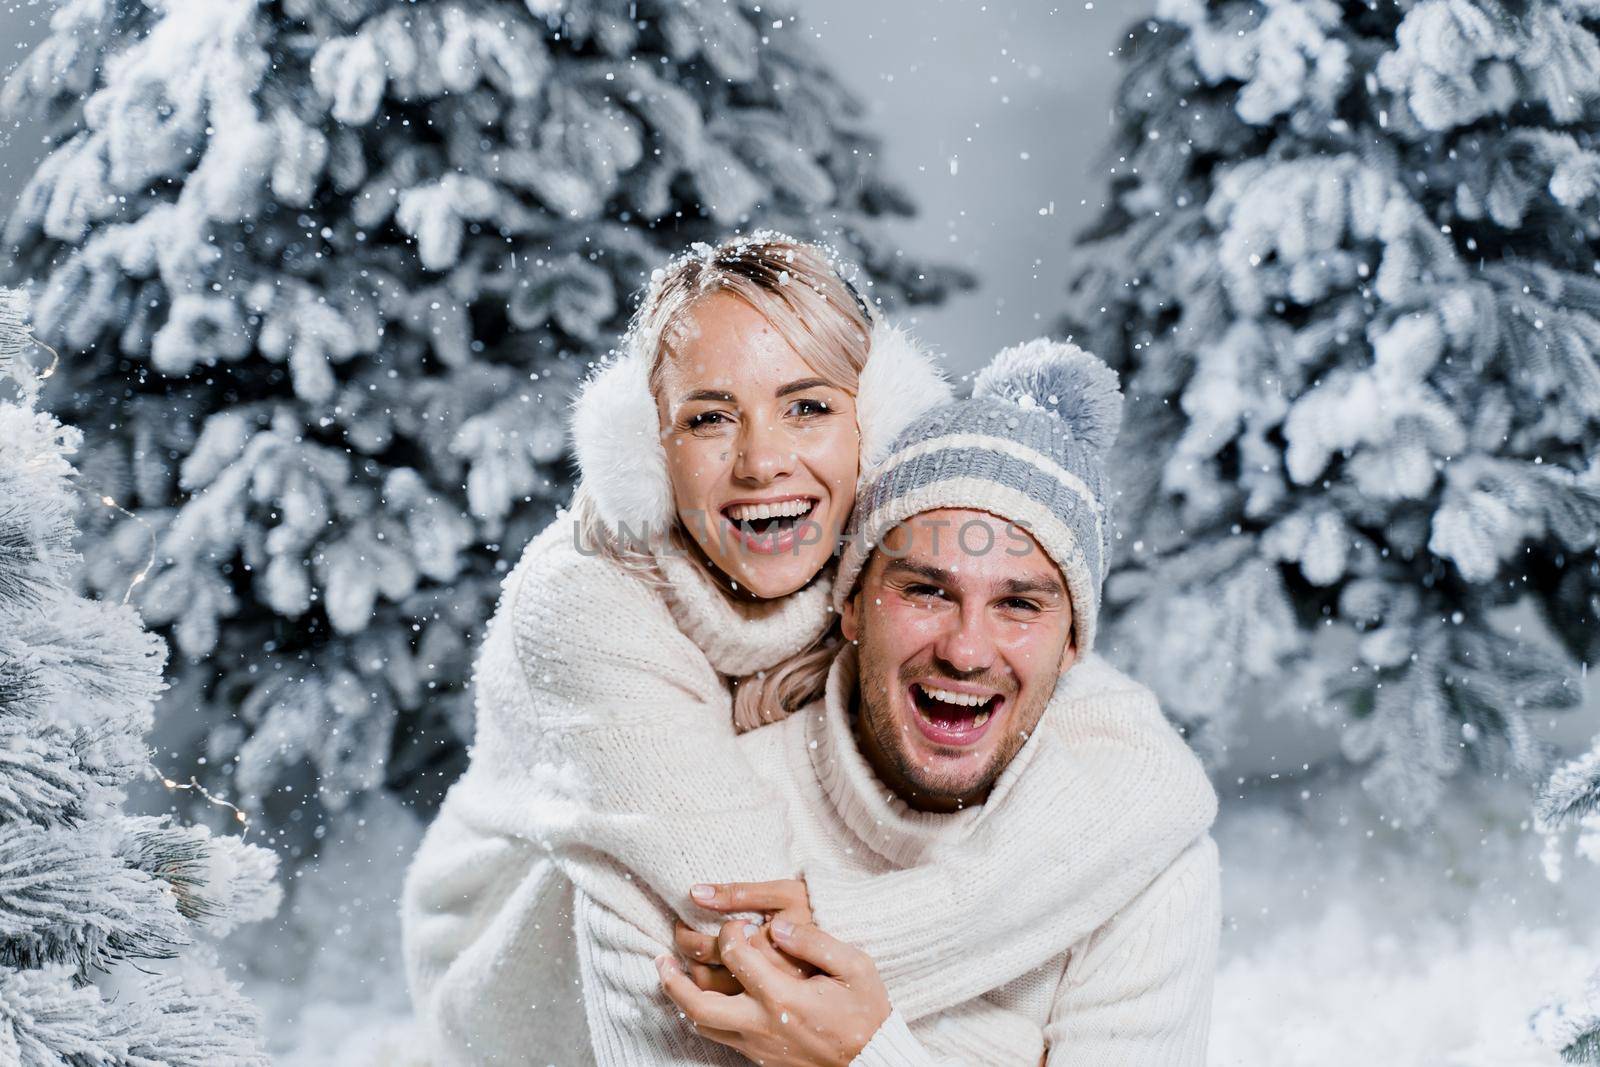 Couple couple laughing and having fun while snow falls near christmass trees. Winter holidays. Love story of young couple weared white pullovers. Happy man and young woman hug each other by Rabizo